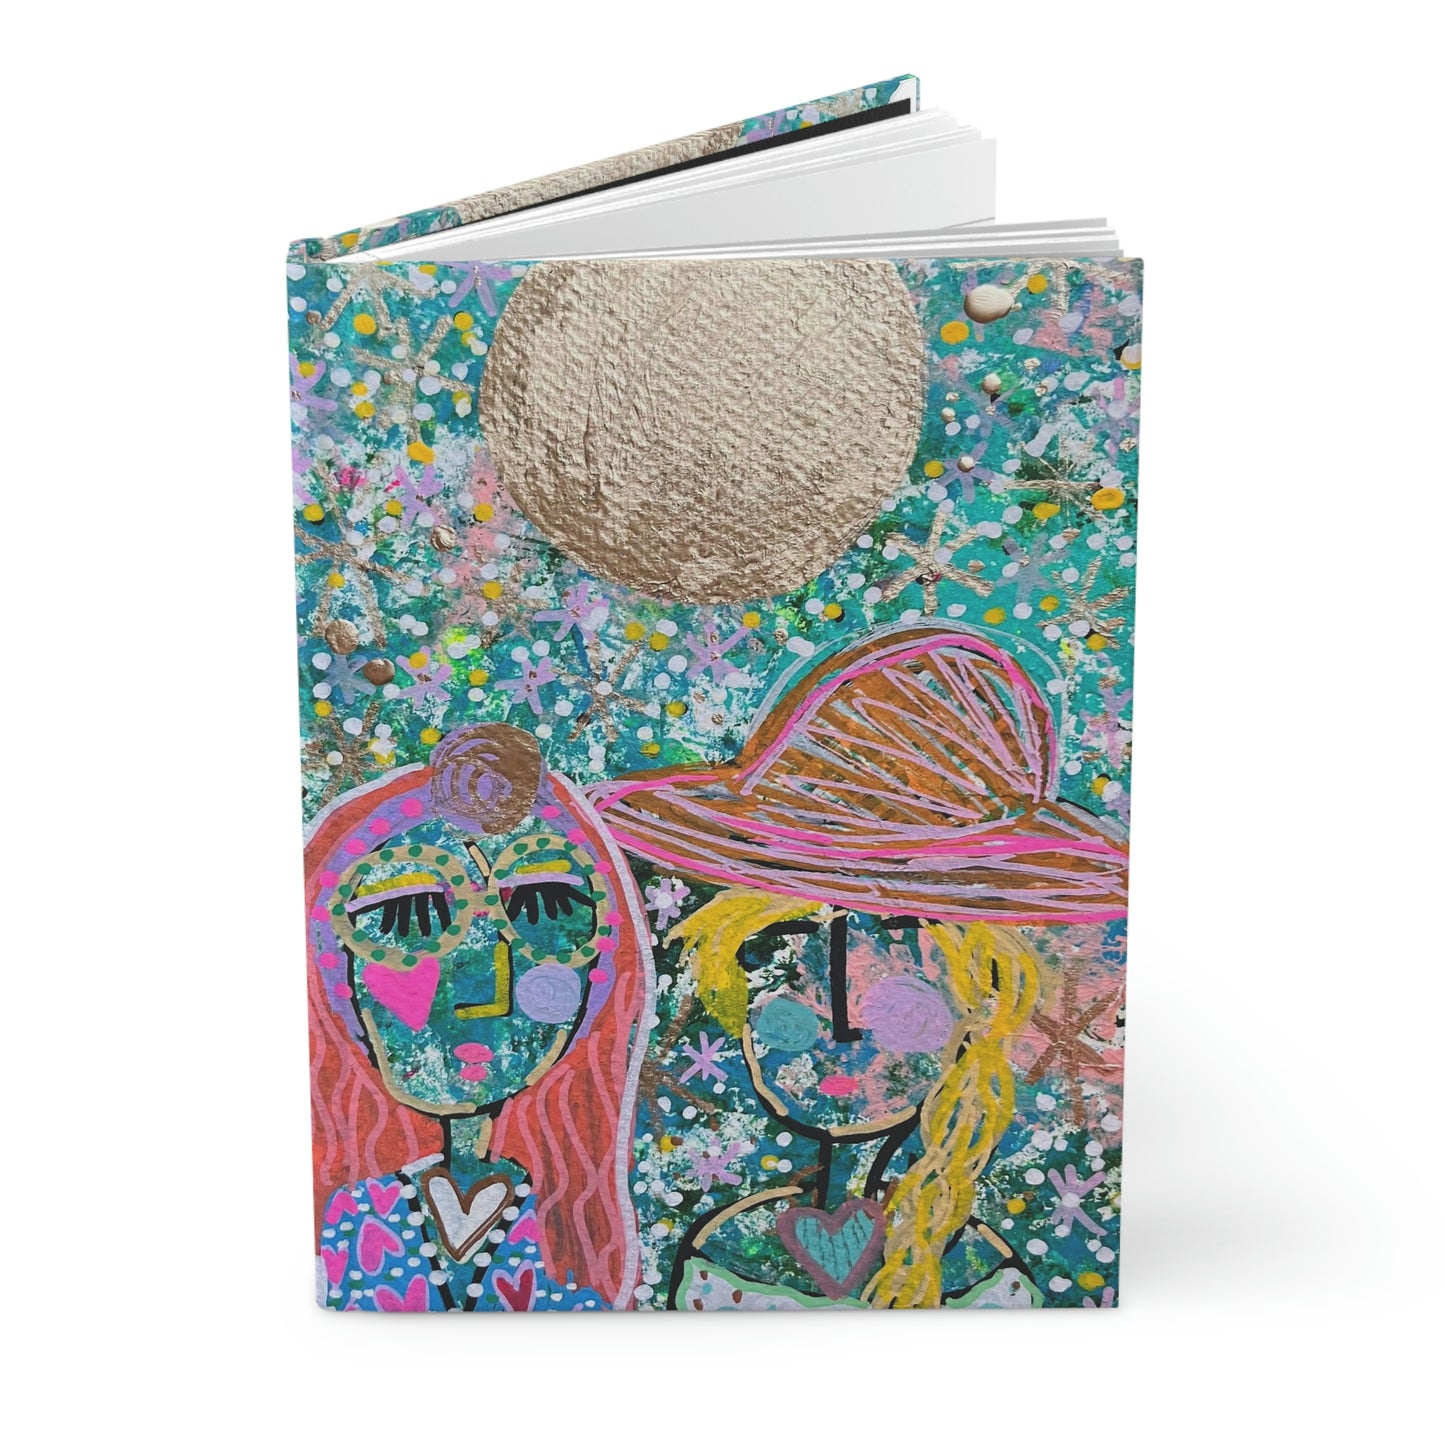 "Smooning With You" Girl Talk Art Hardcover Journal Matte